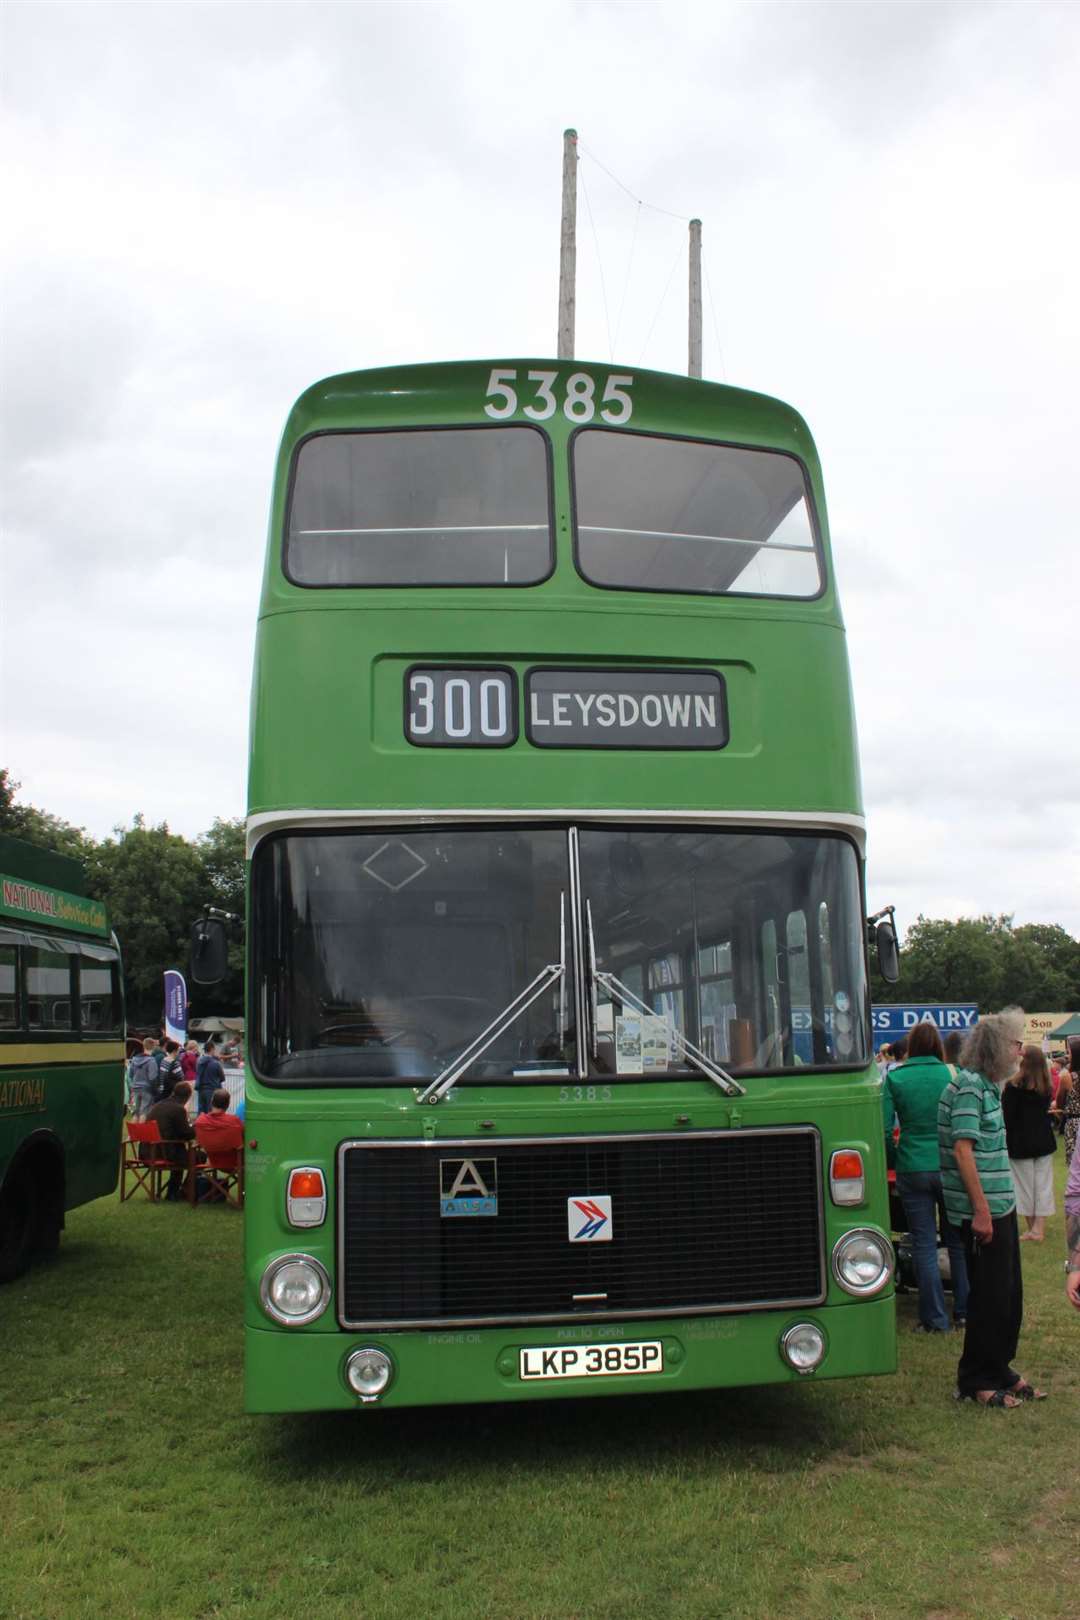 Hold very tight: this original Maidstsone & District Volvo Ailsa bus from 1975 was used iin Hastings and the Medway Towns until it was withdrawn from service in 1983i and sent to Scotland. It is now back in its 1981 colours after a respay in 2012 and ready to take passengers to Leysdown on the Isle of Sheppey. (13545713)